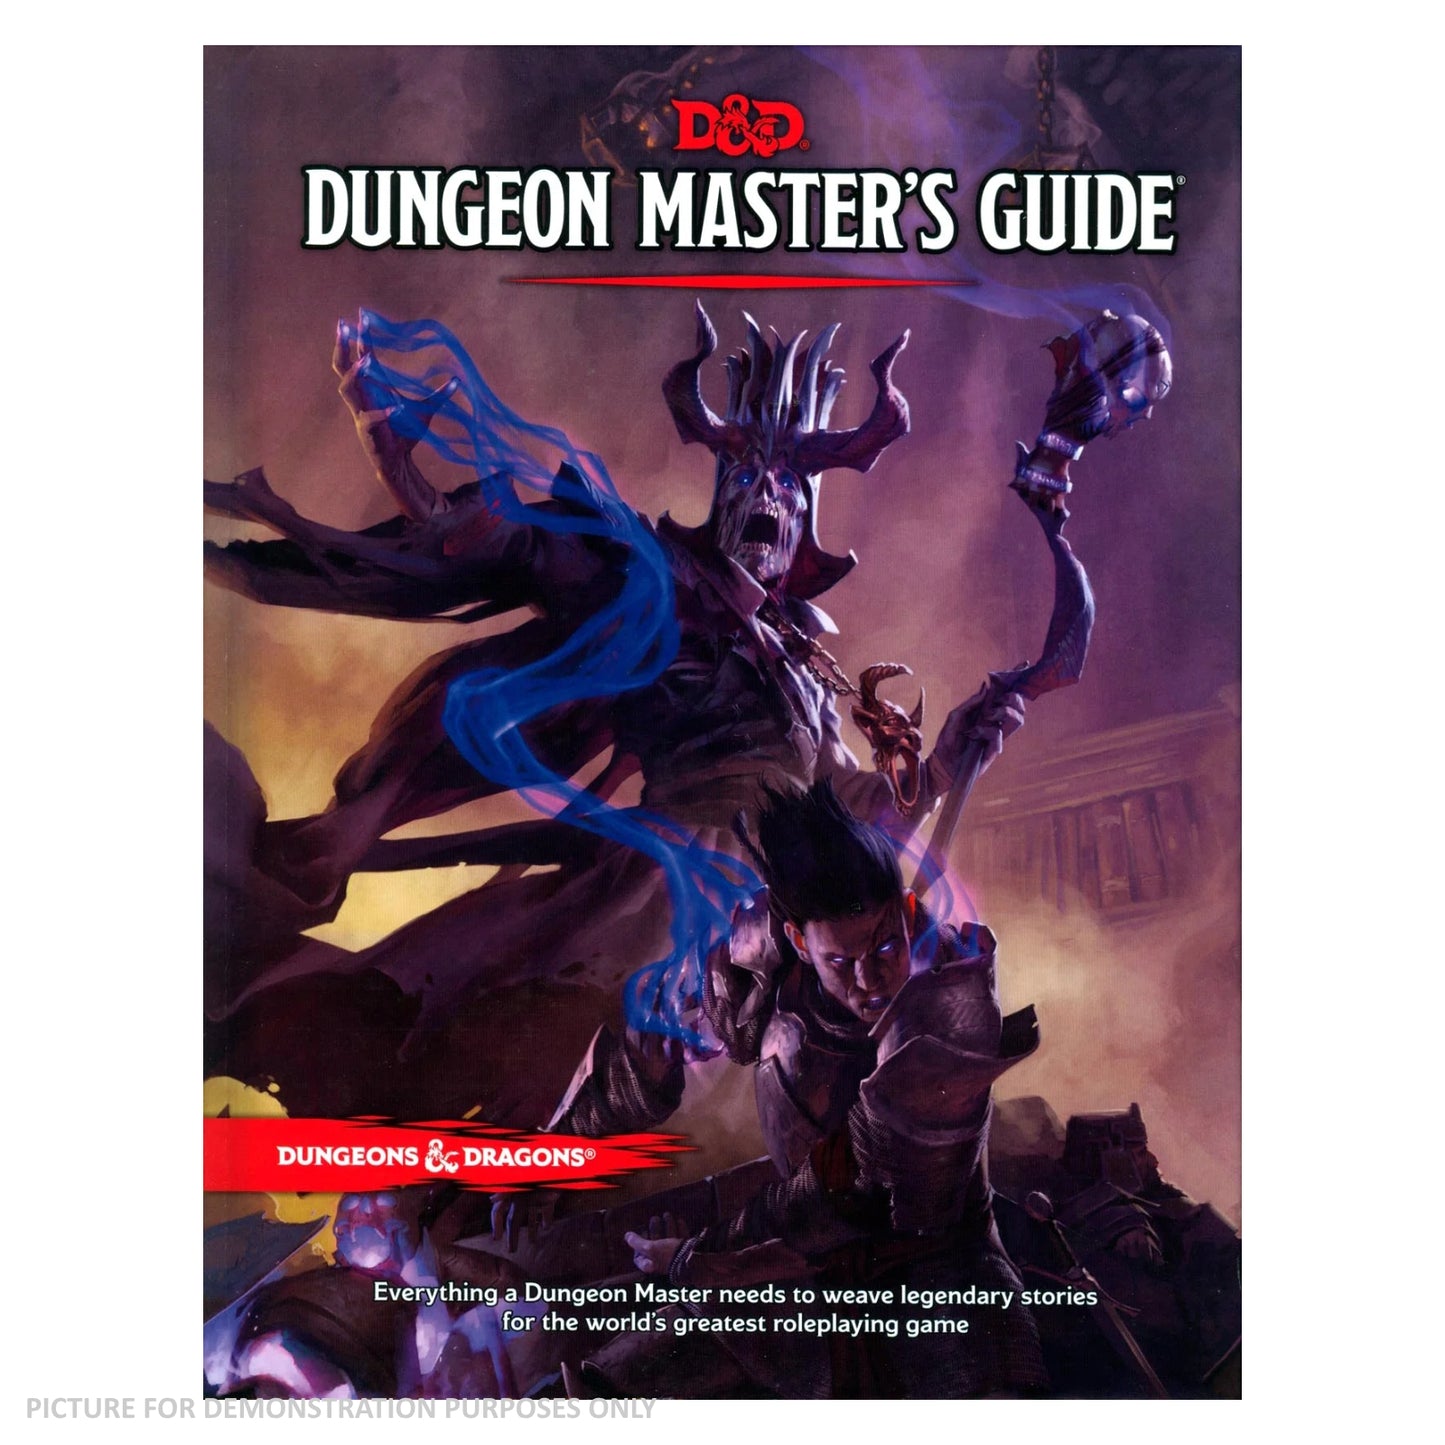 Dungeons & Dragons Dungeon Master's Guide